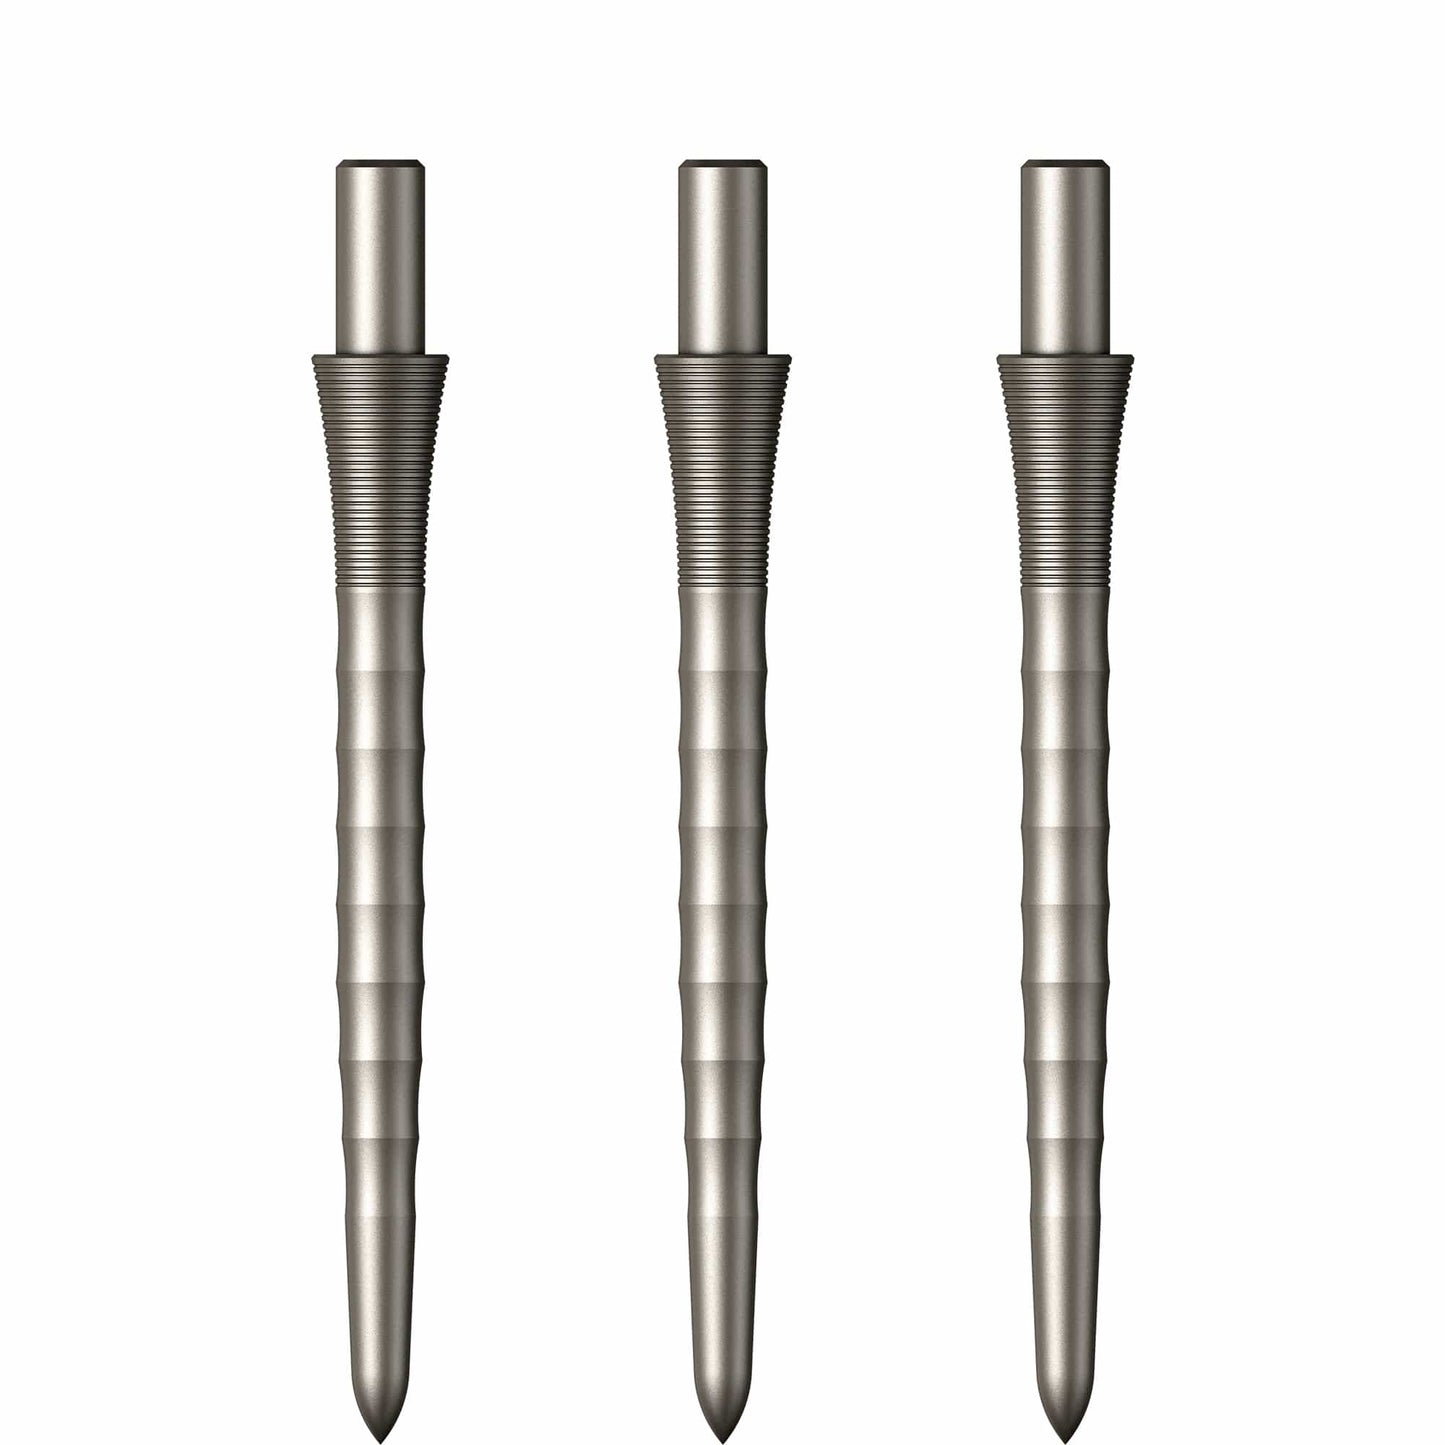 Mission Sniper Points - Steel Tip - Precision Spare Points - Ripple - Silver 28mm